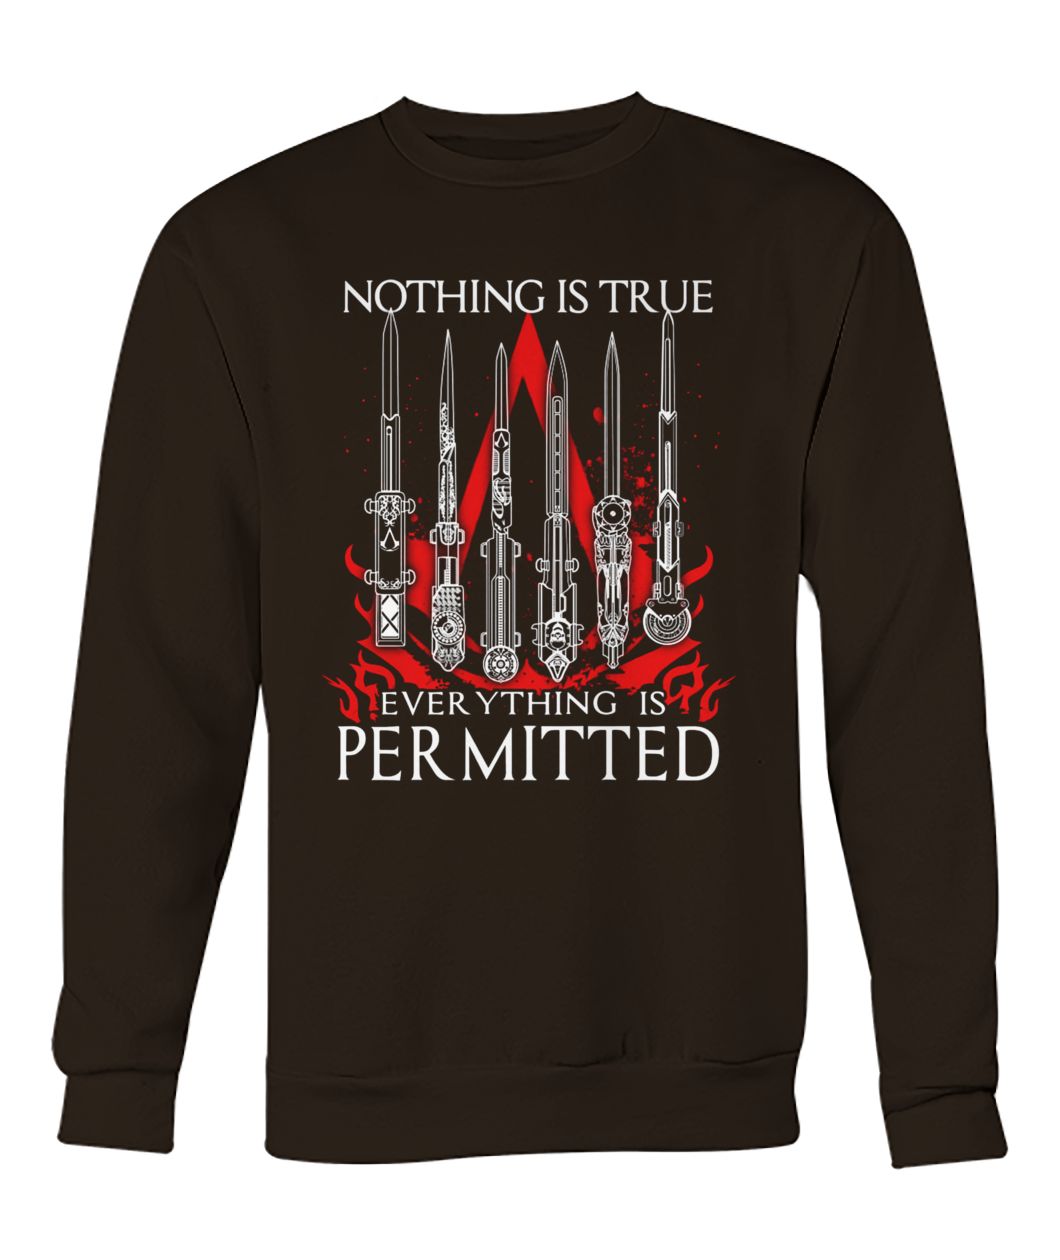 Assassin's creed nothing is true everything is permitted crew neck sweatshirt